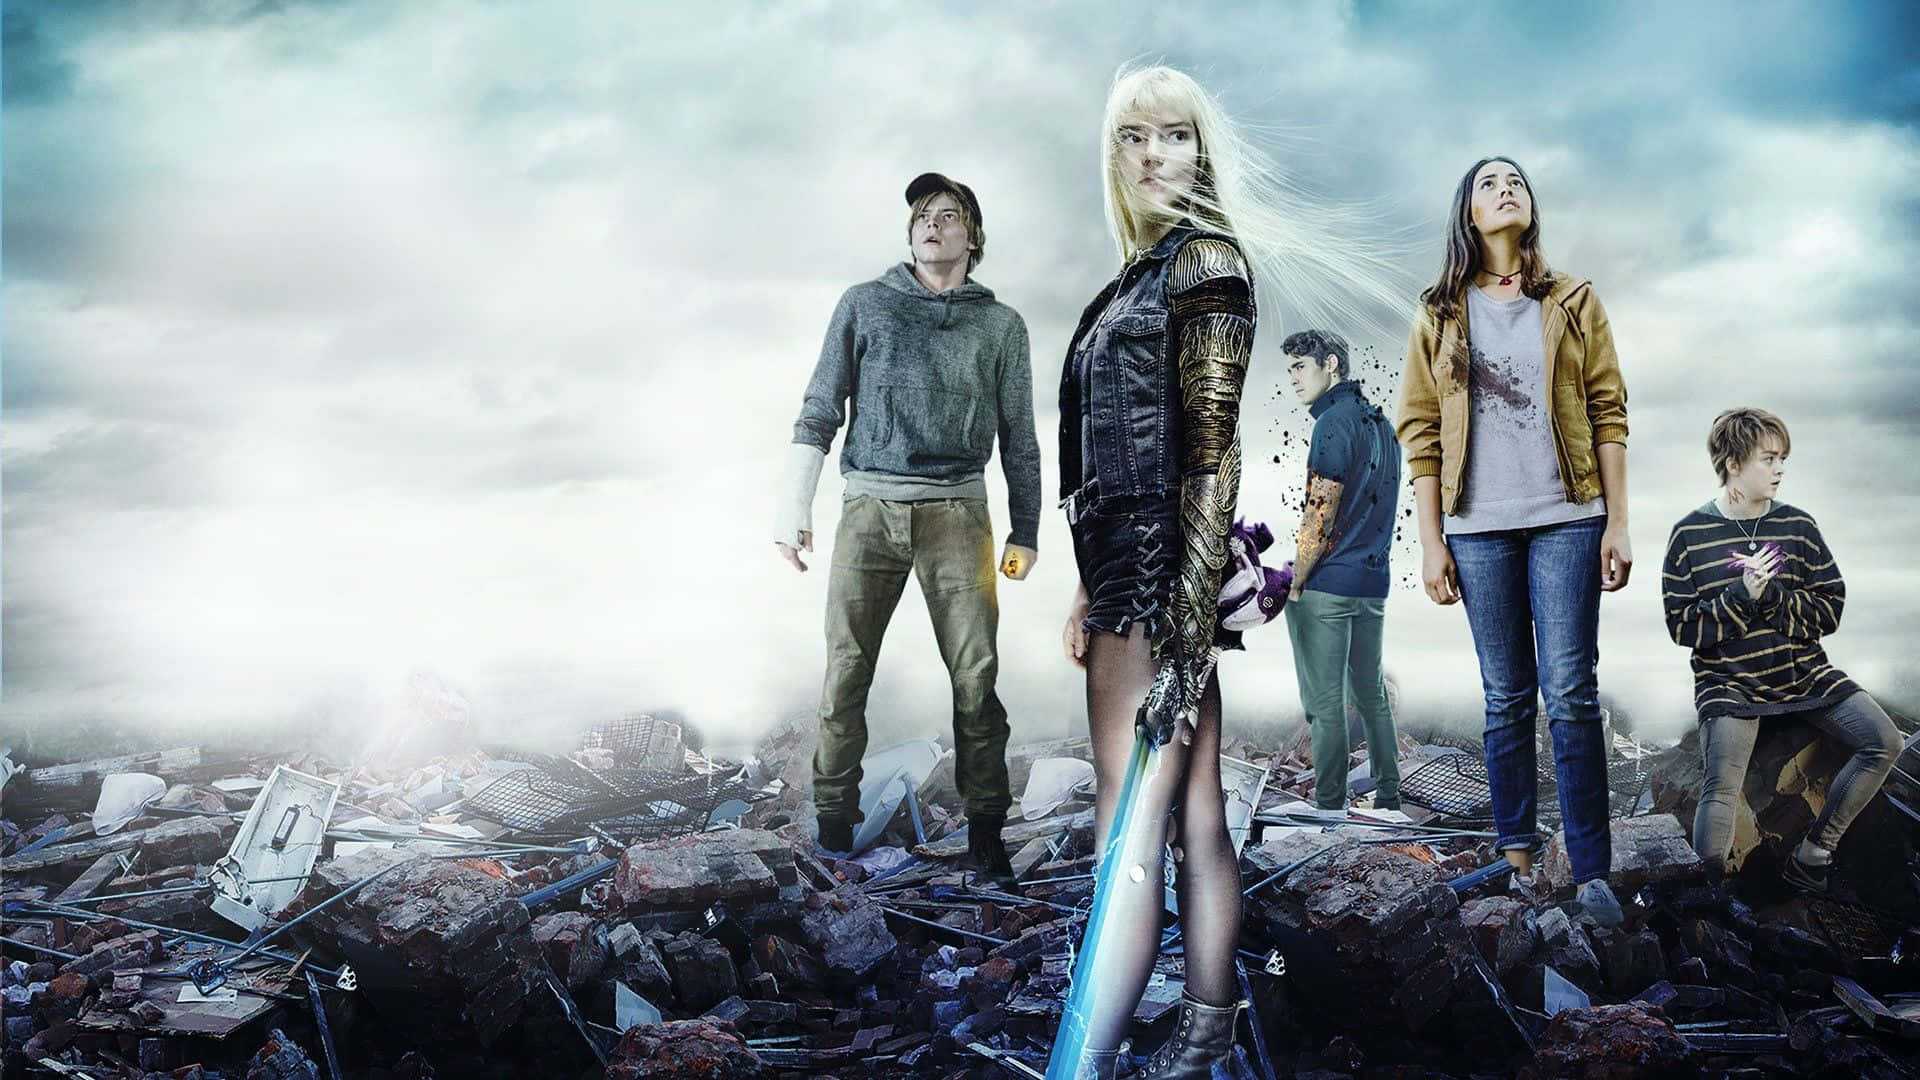 The New Mutants team in action Wallpaper